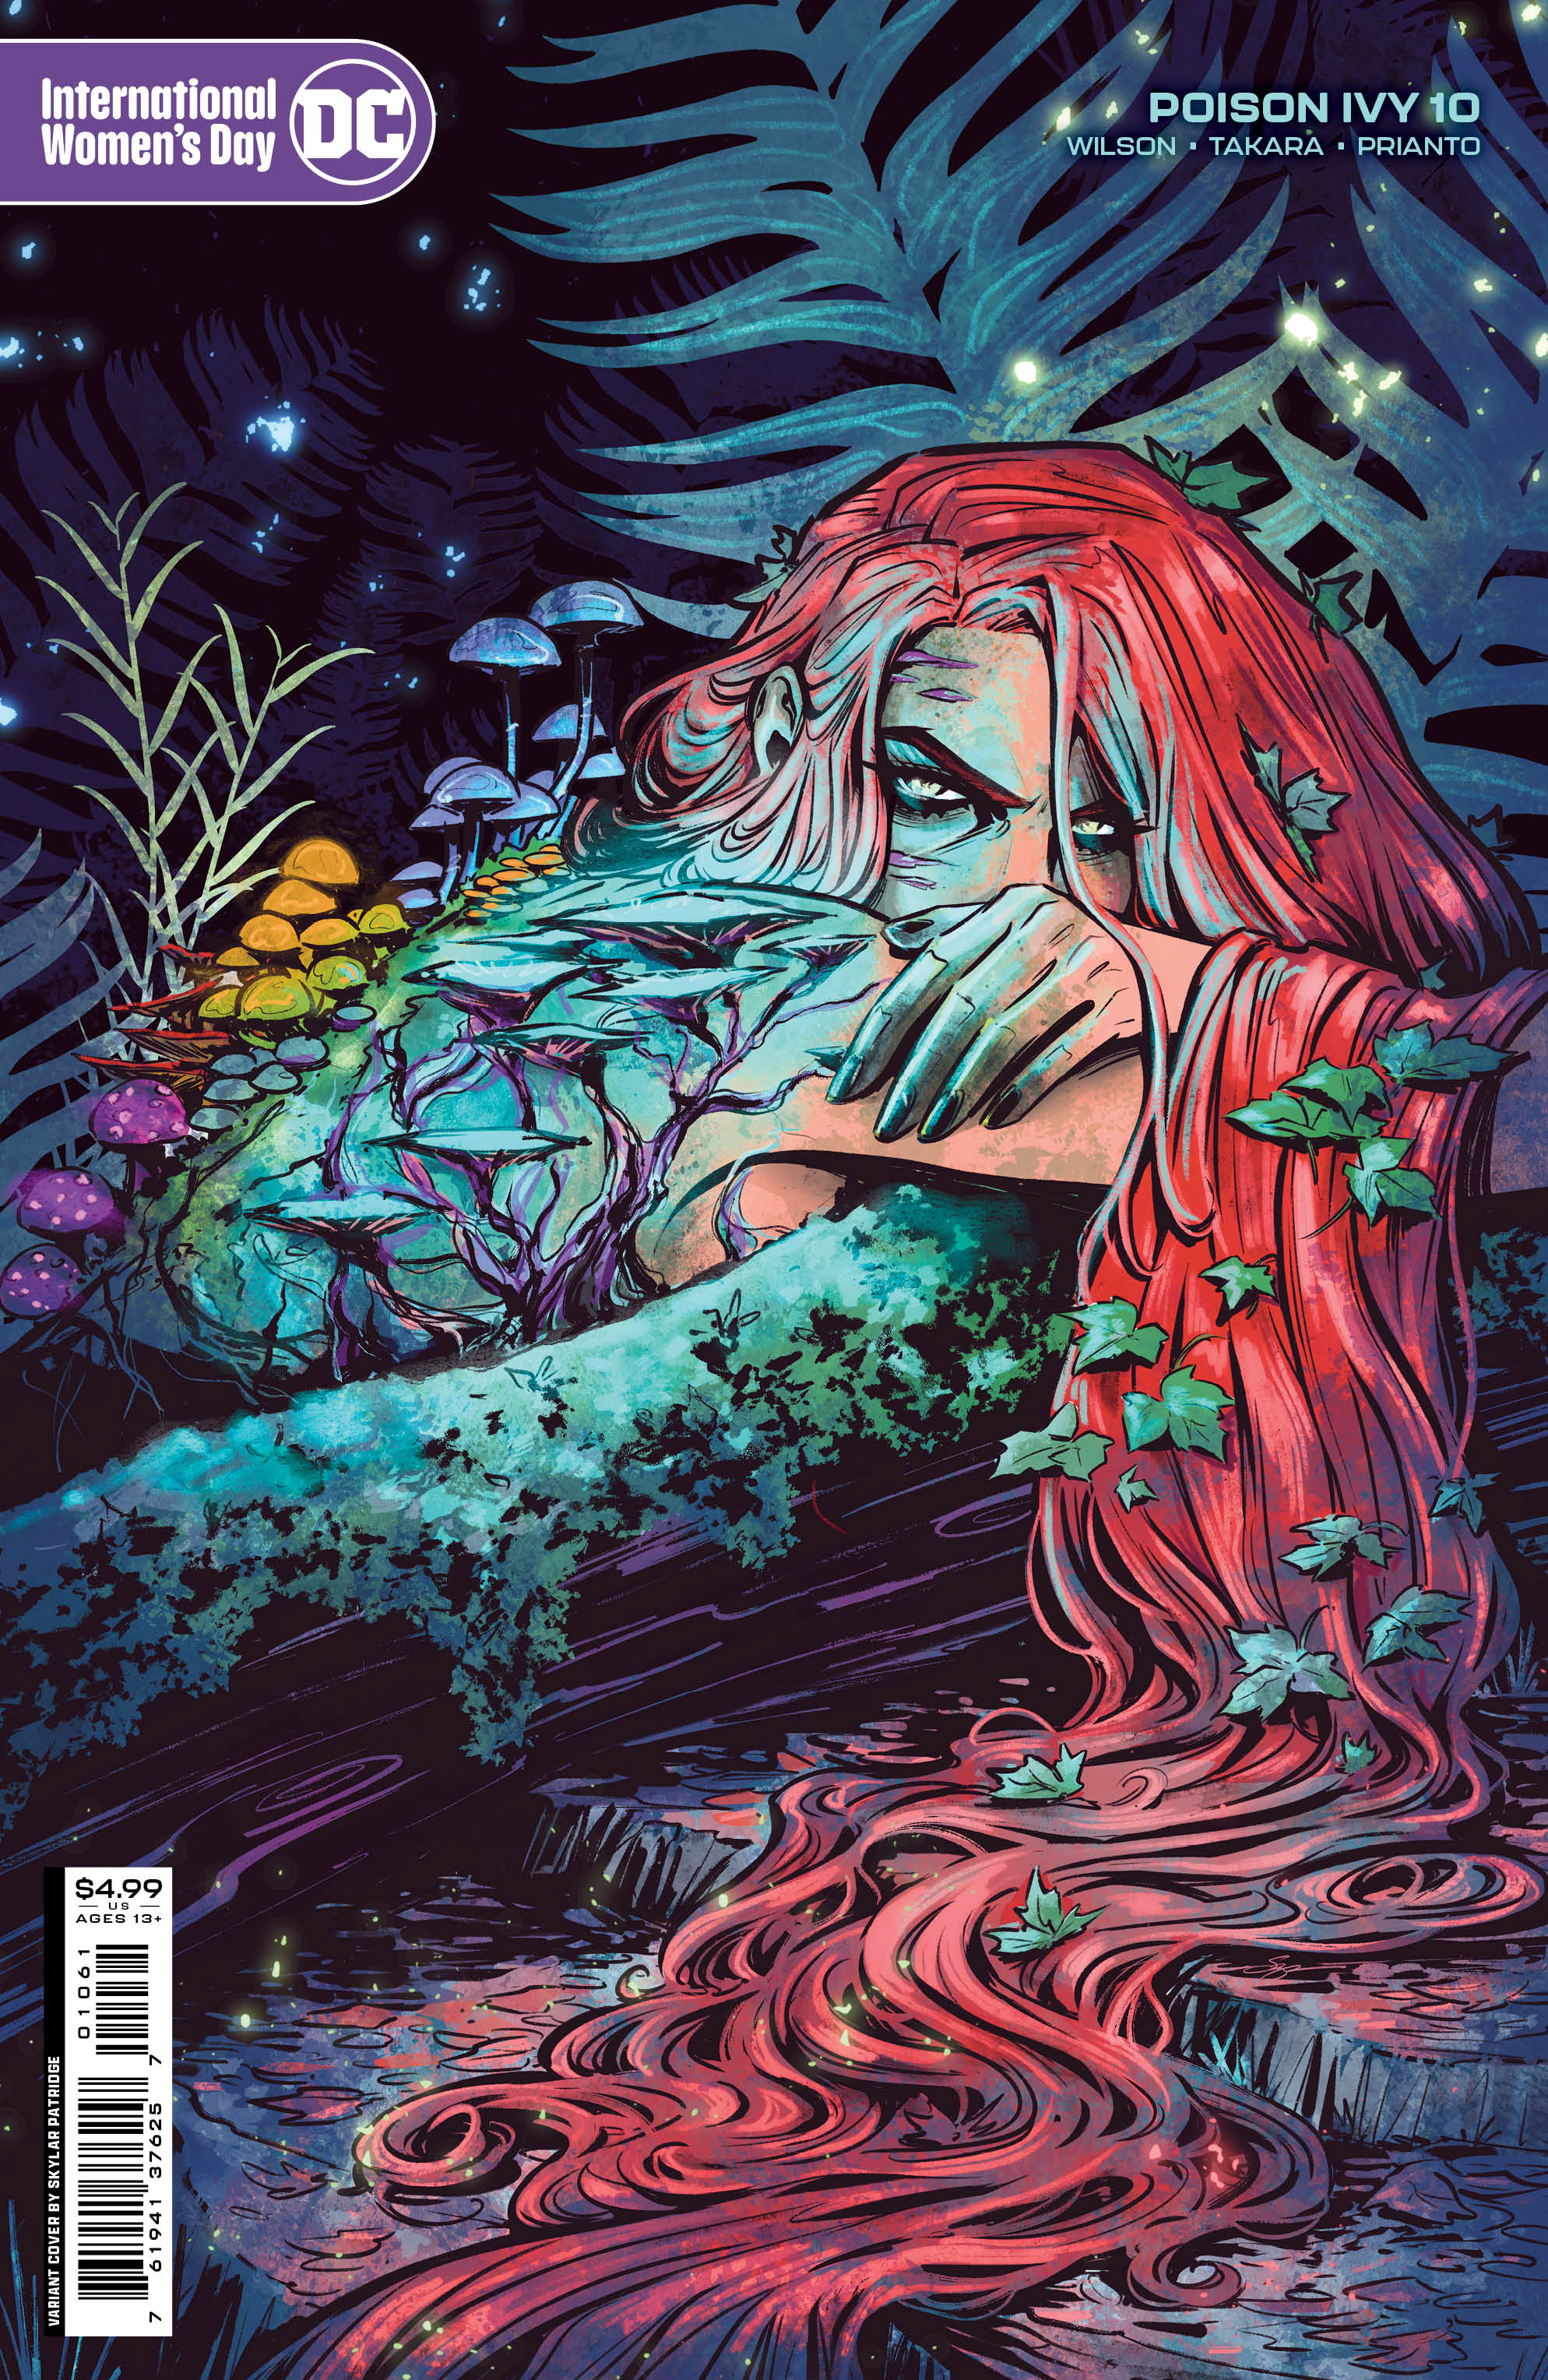 Illustration of Poison Ivy with her arm covering her face